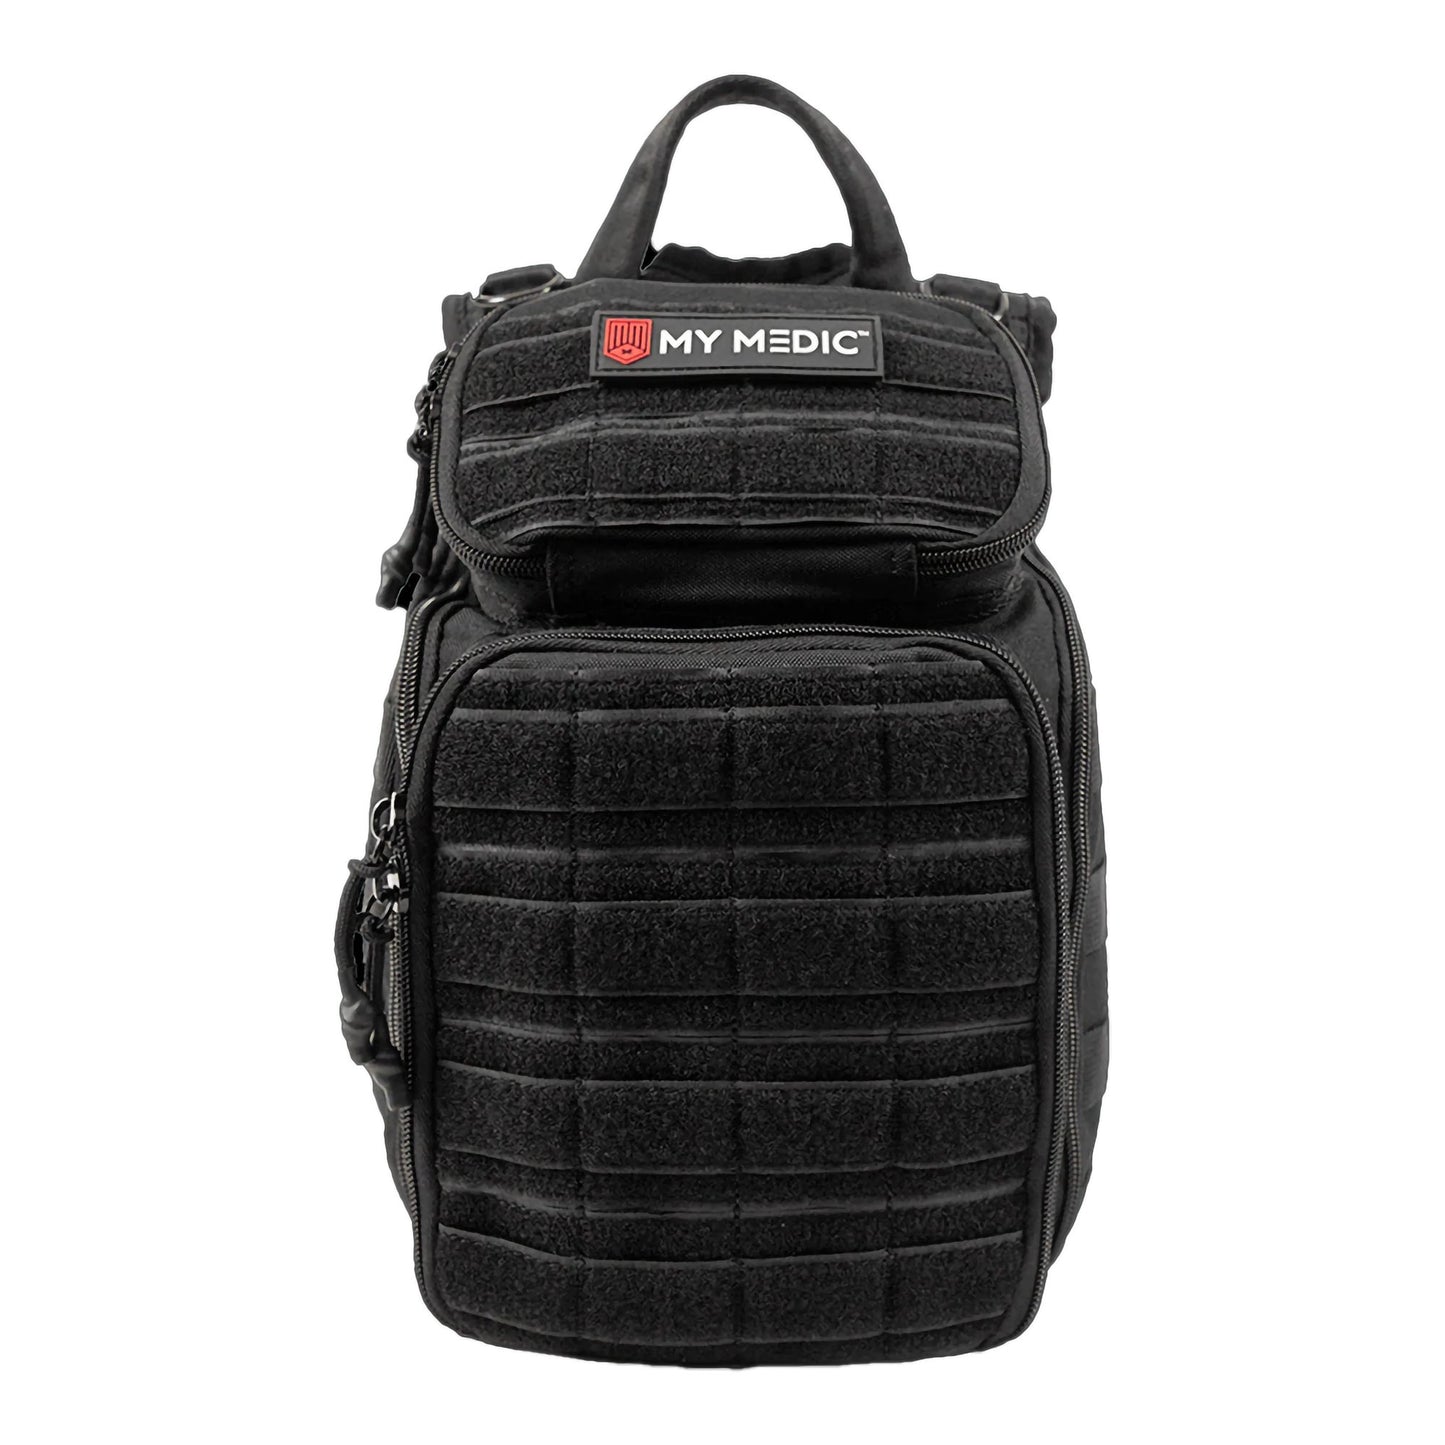 My Medic RECON First Aid Kit Backpack with Emergency Medical Supplies - Black